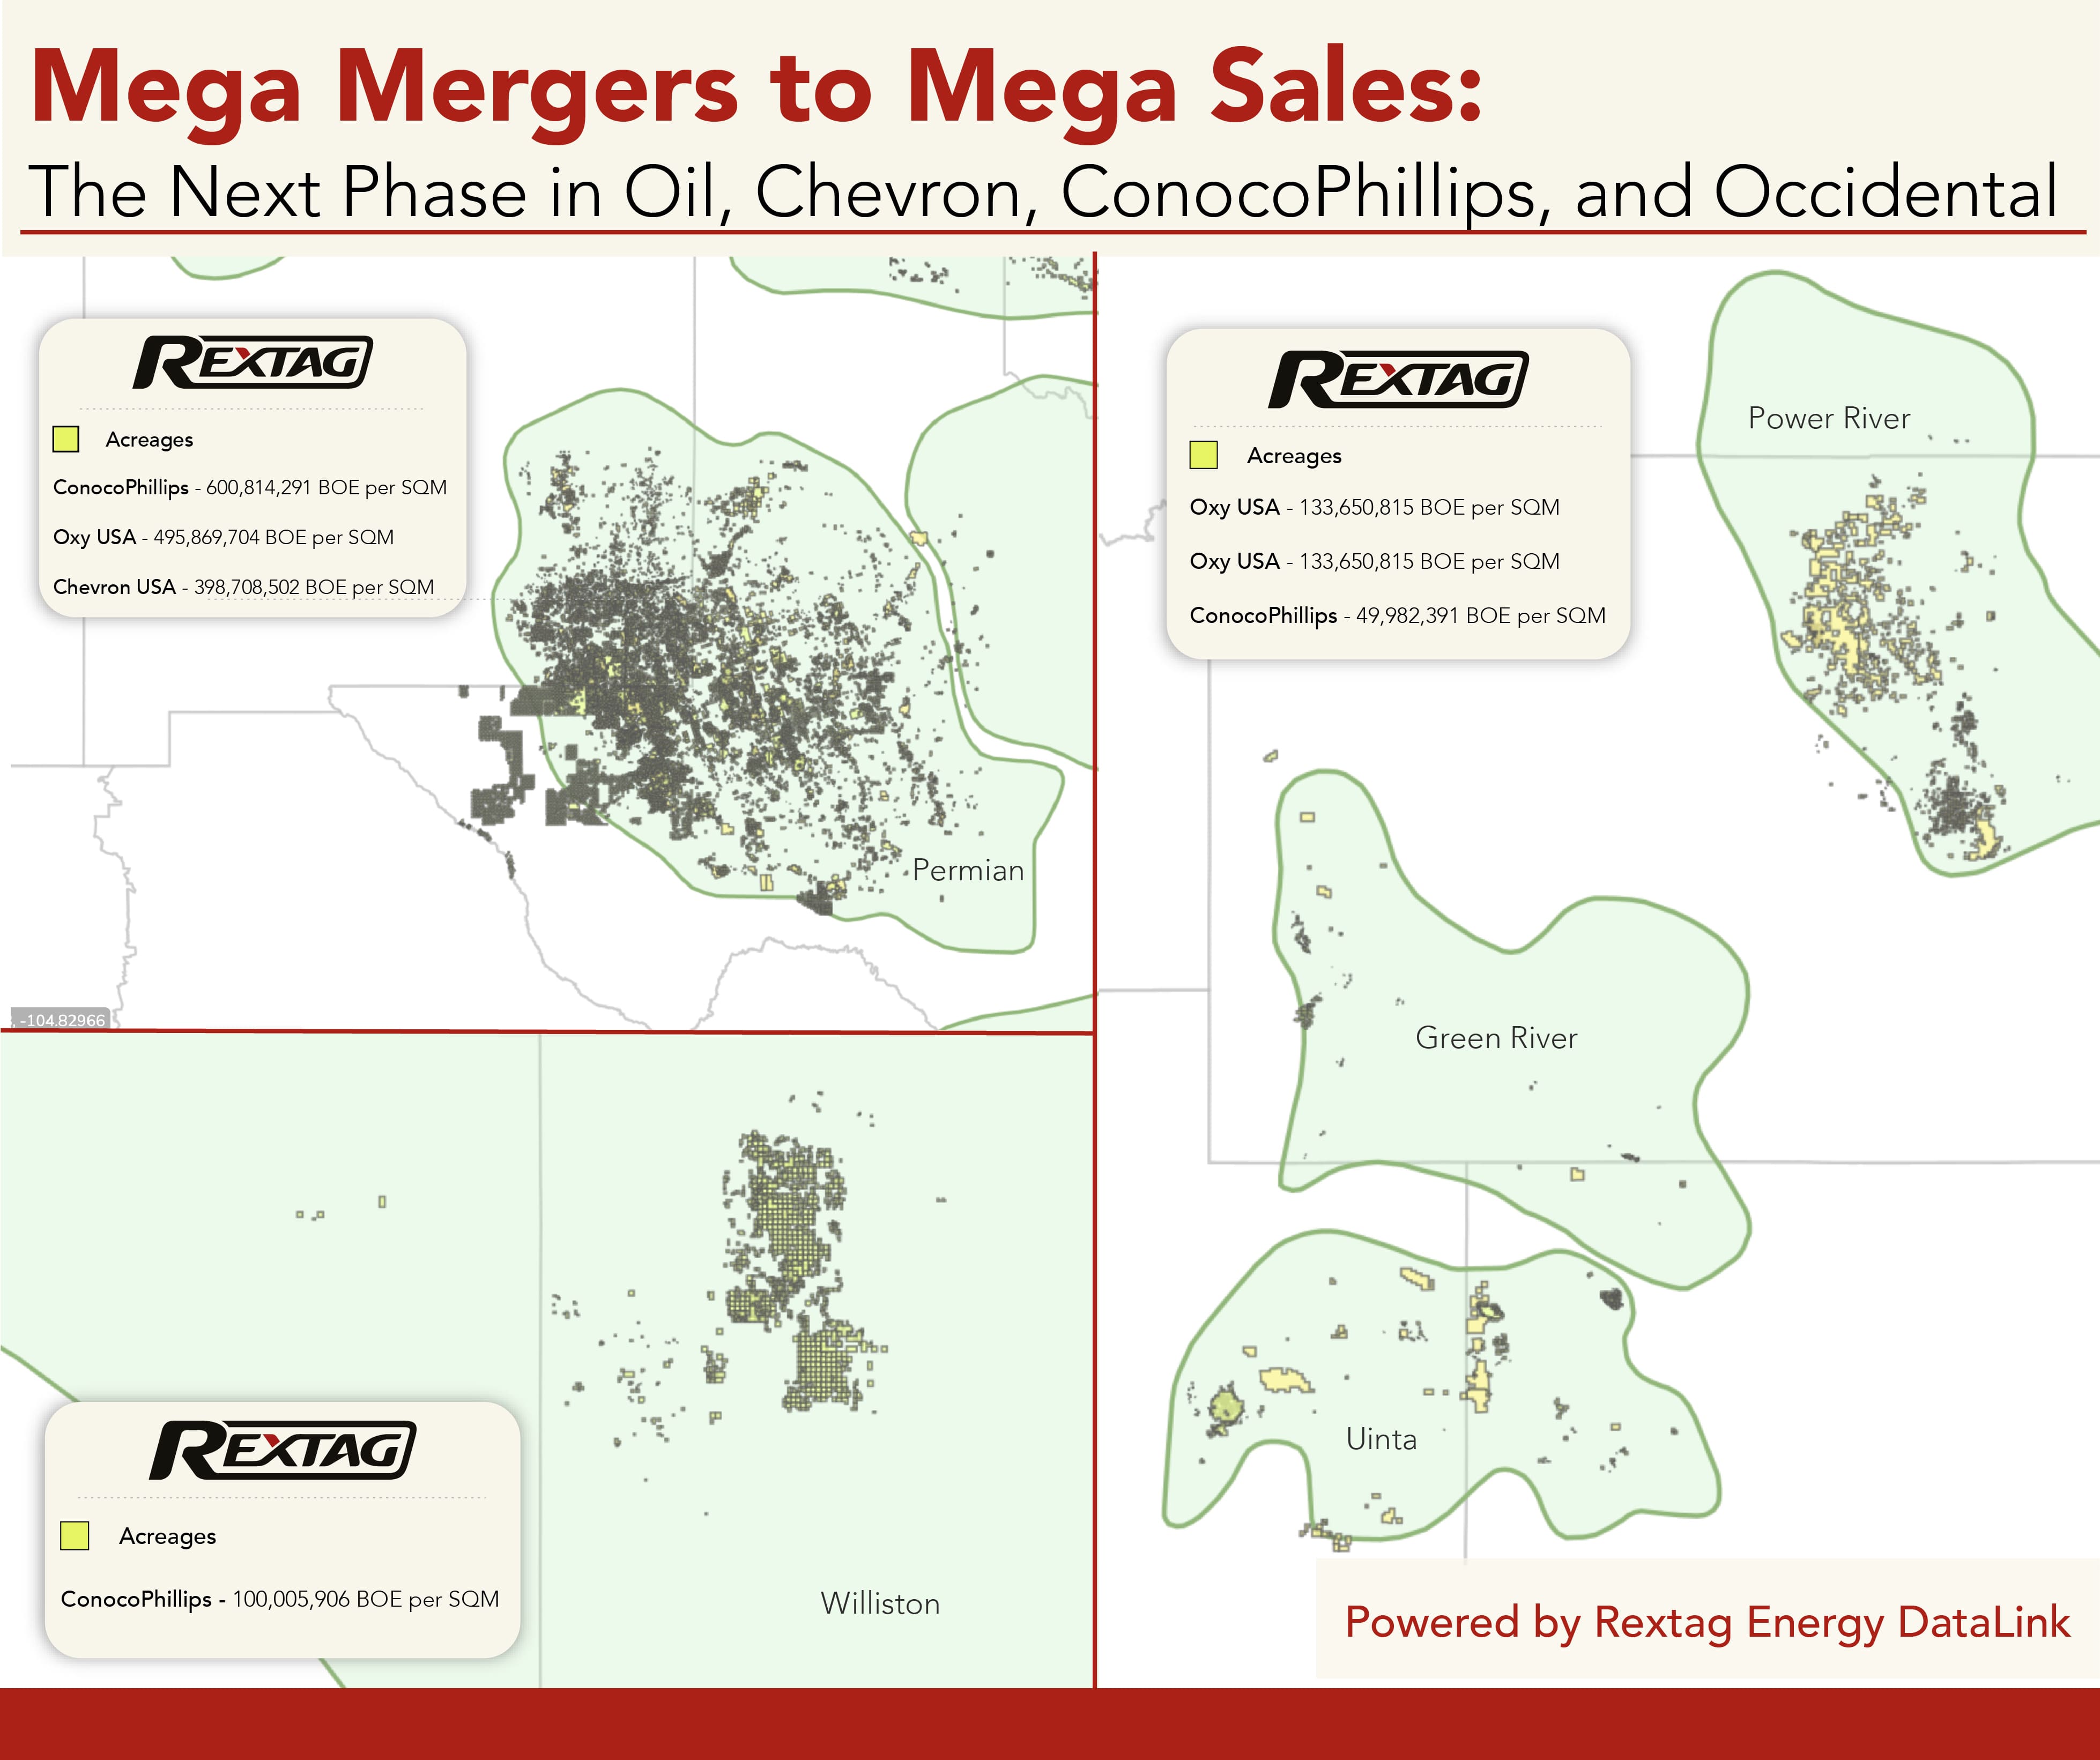 Mega-Mergers-to-Mega-Sales-The-Next-Phase-in-Oil-Chevron-ConocoPhillips-and-Occidental